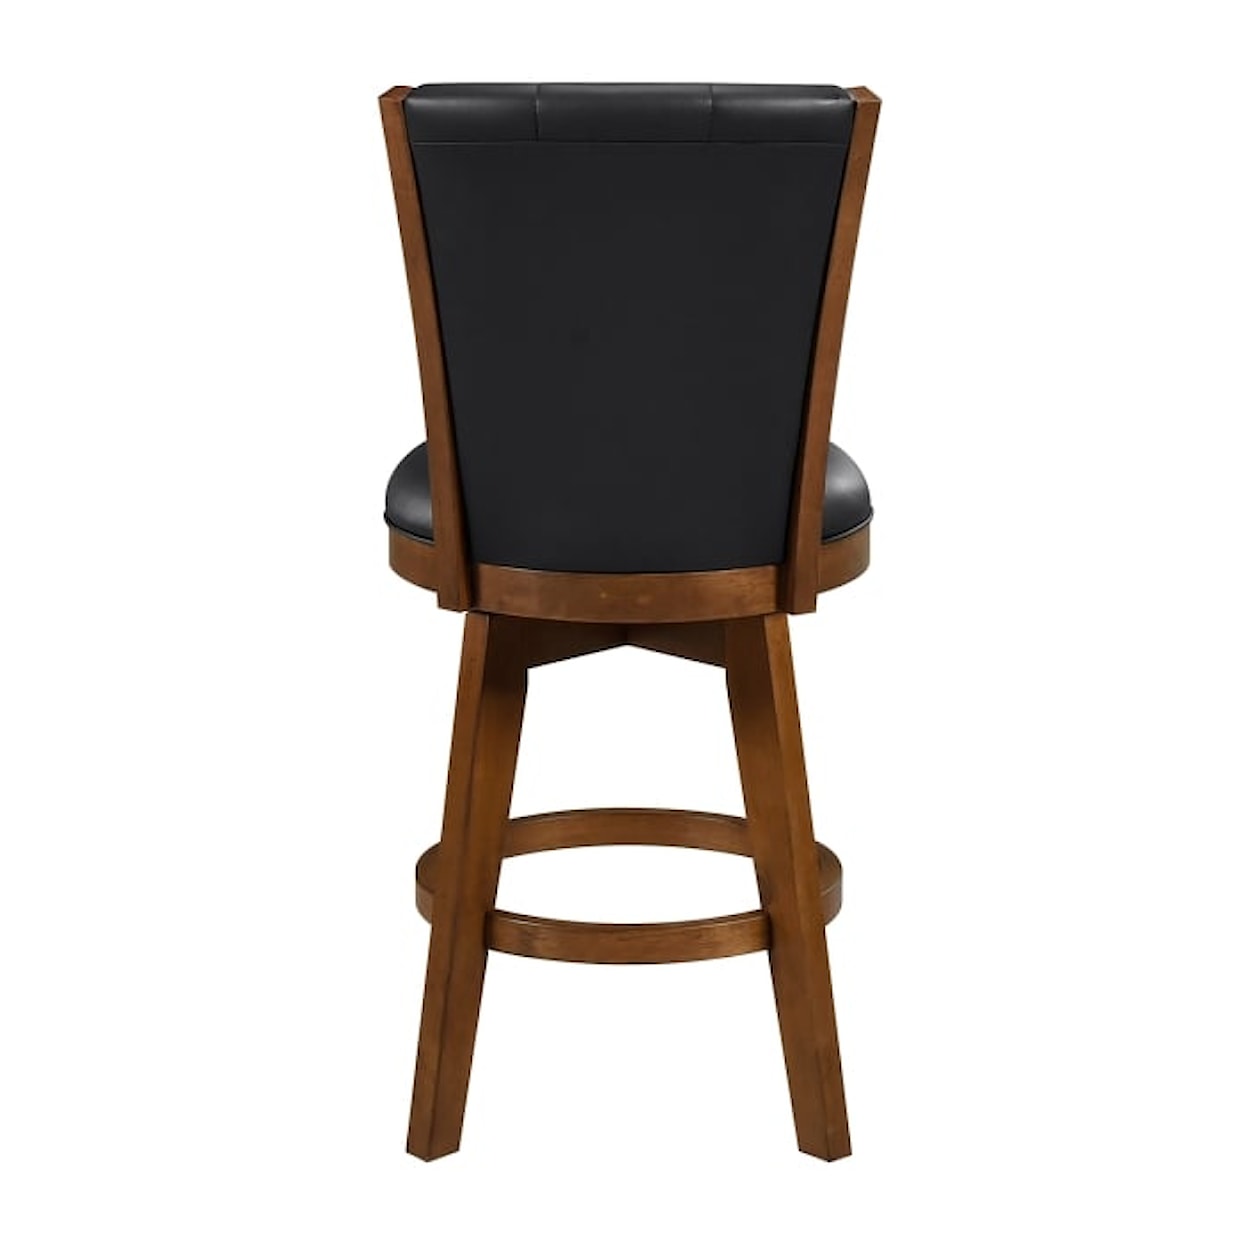 Homelegance Miscellaneous Counter Stool